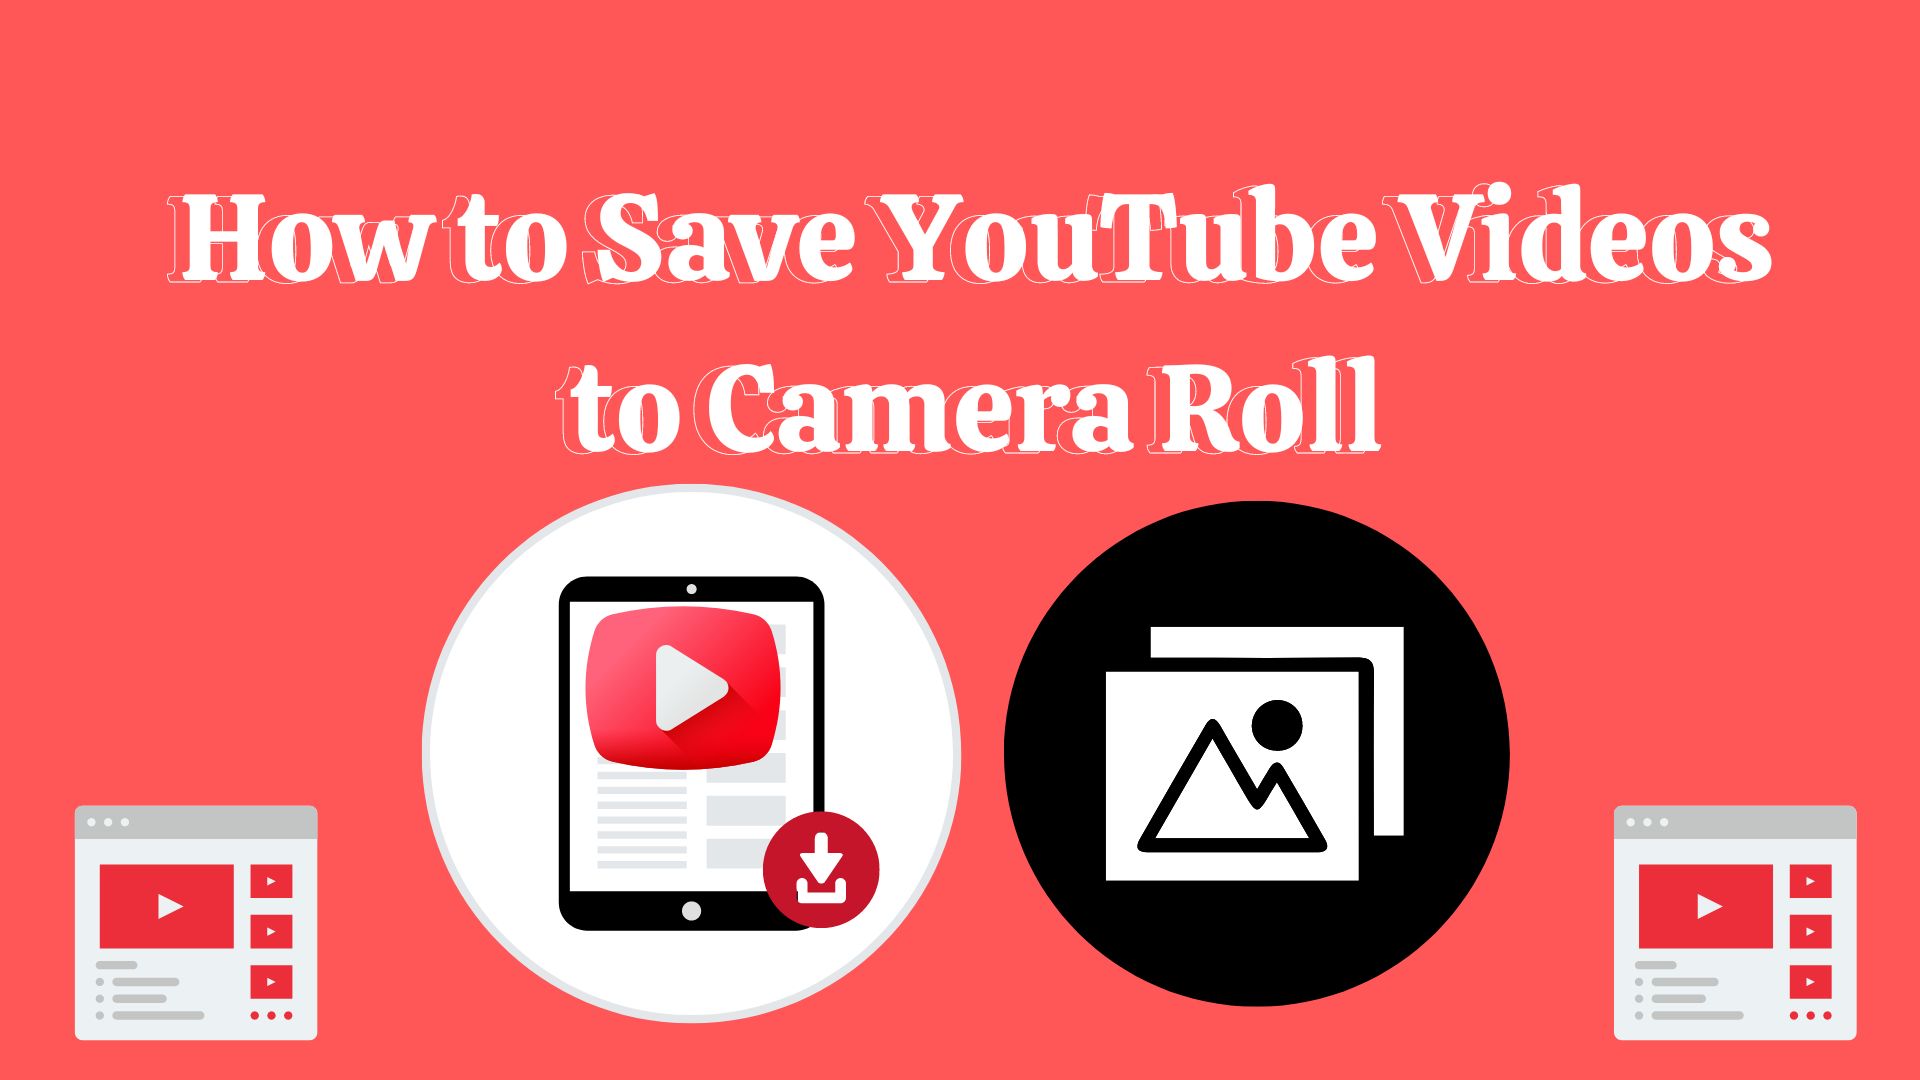 How to save YouTube Videos to Camera Roll